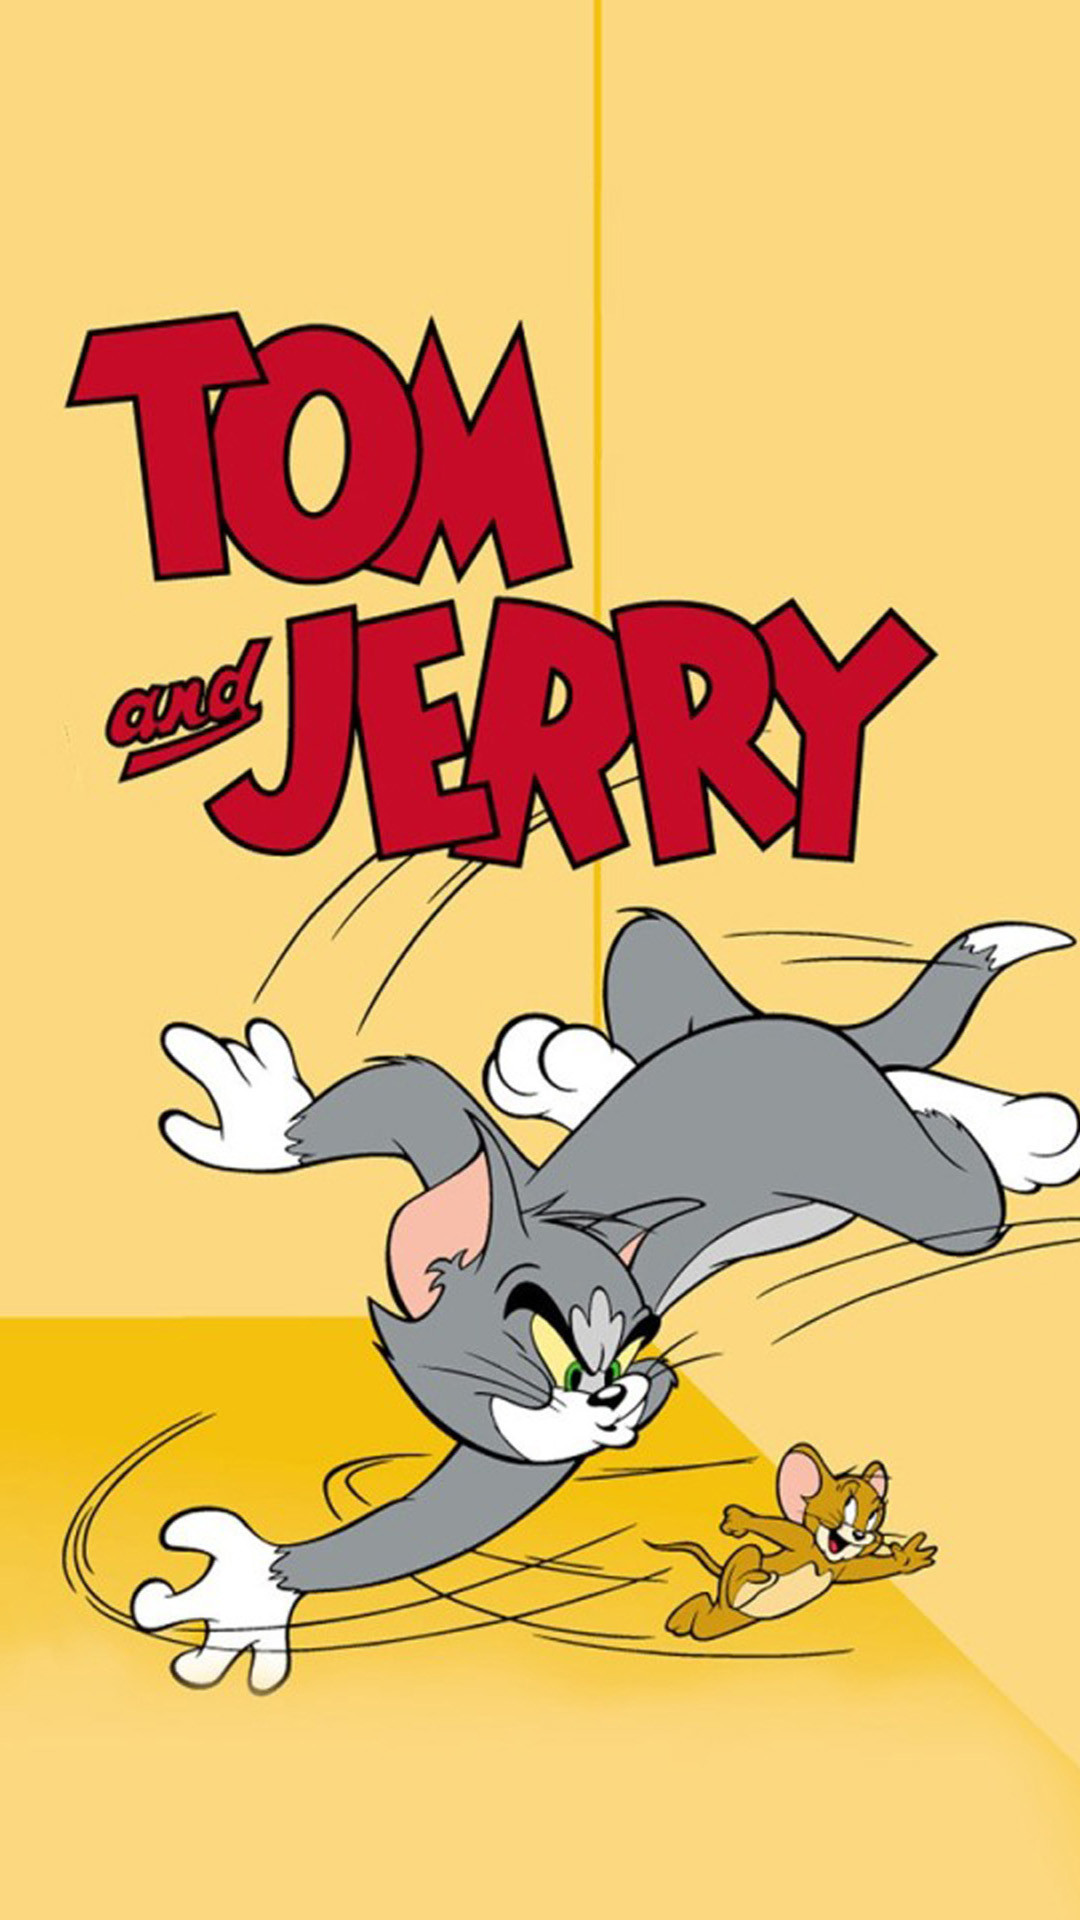 1080x1920 Funny Tom and Jerry HD Wallpaper iPhone 6 plus